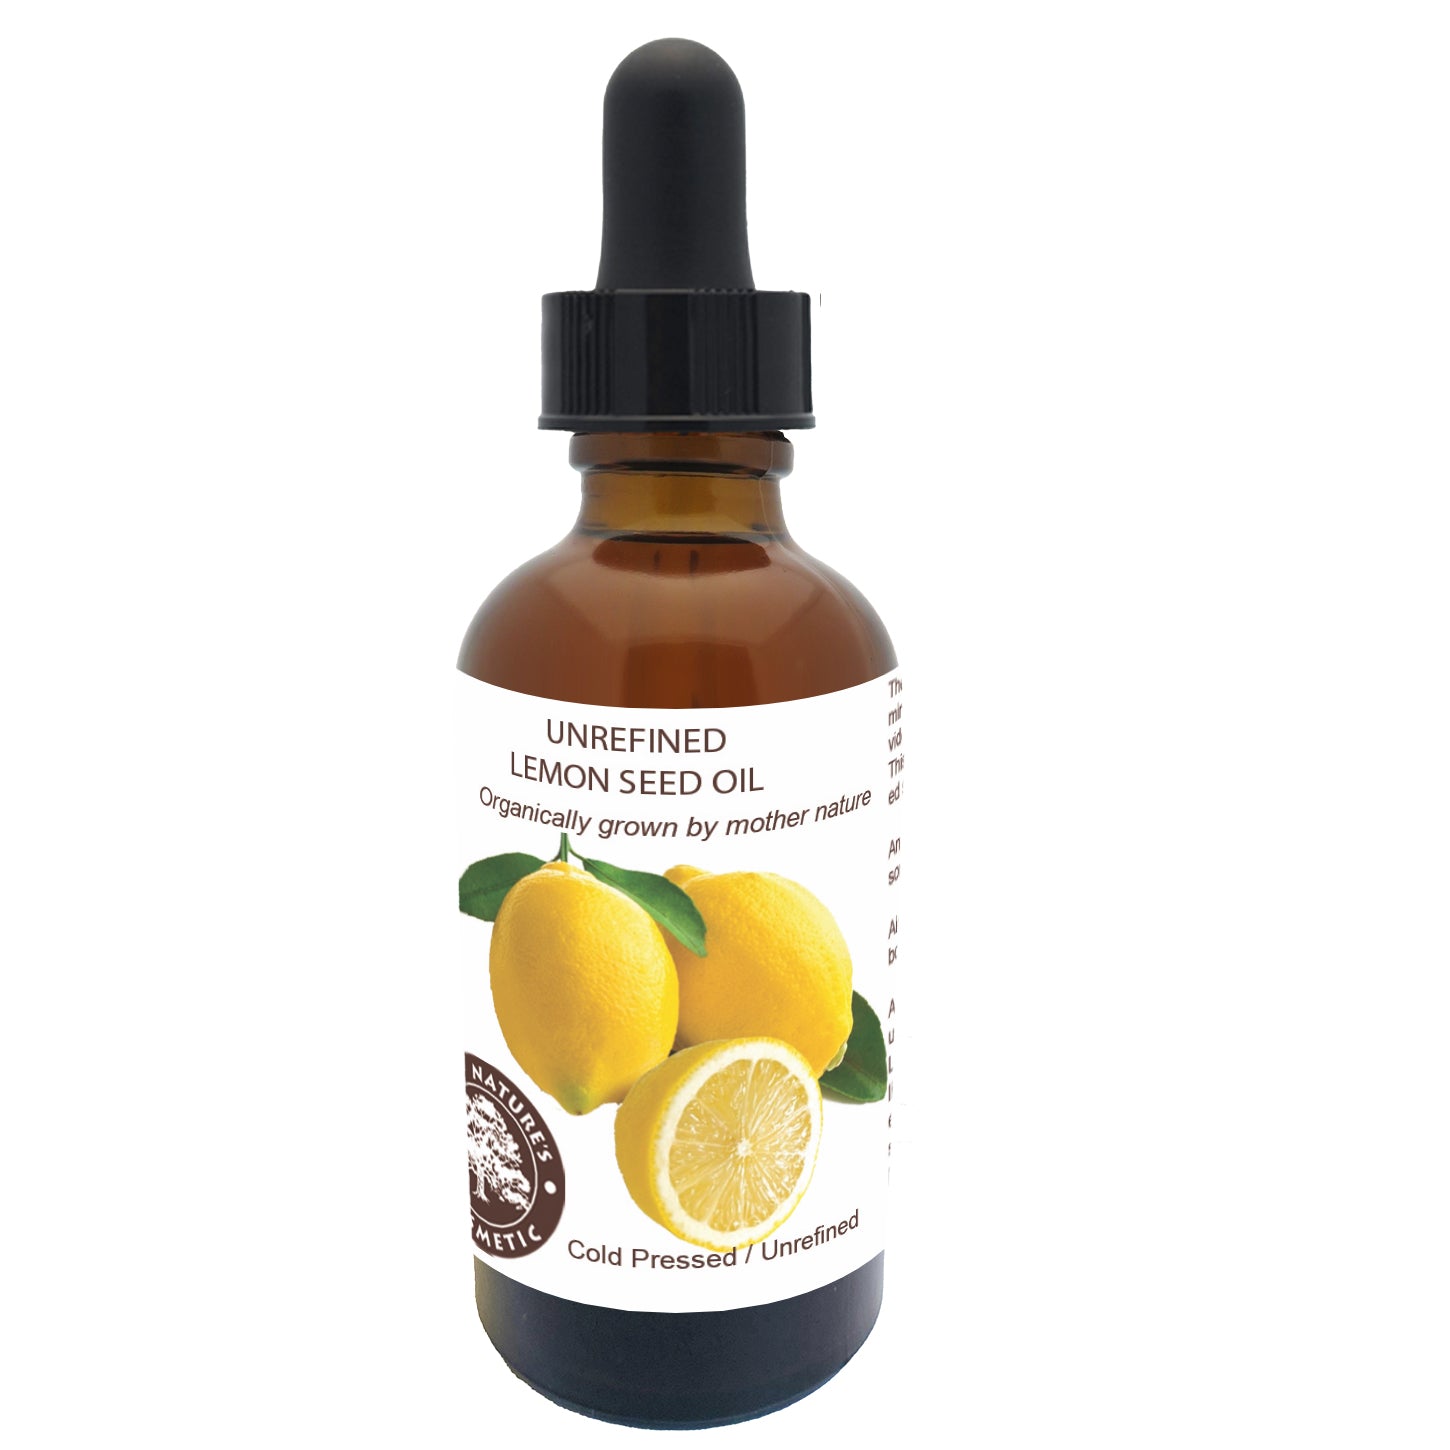 Lemon Seed Oil for dry, dull skin, age spots. Organic, cold pressed, unrefined, vegan friendly, natural skin care for younger you.